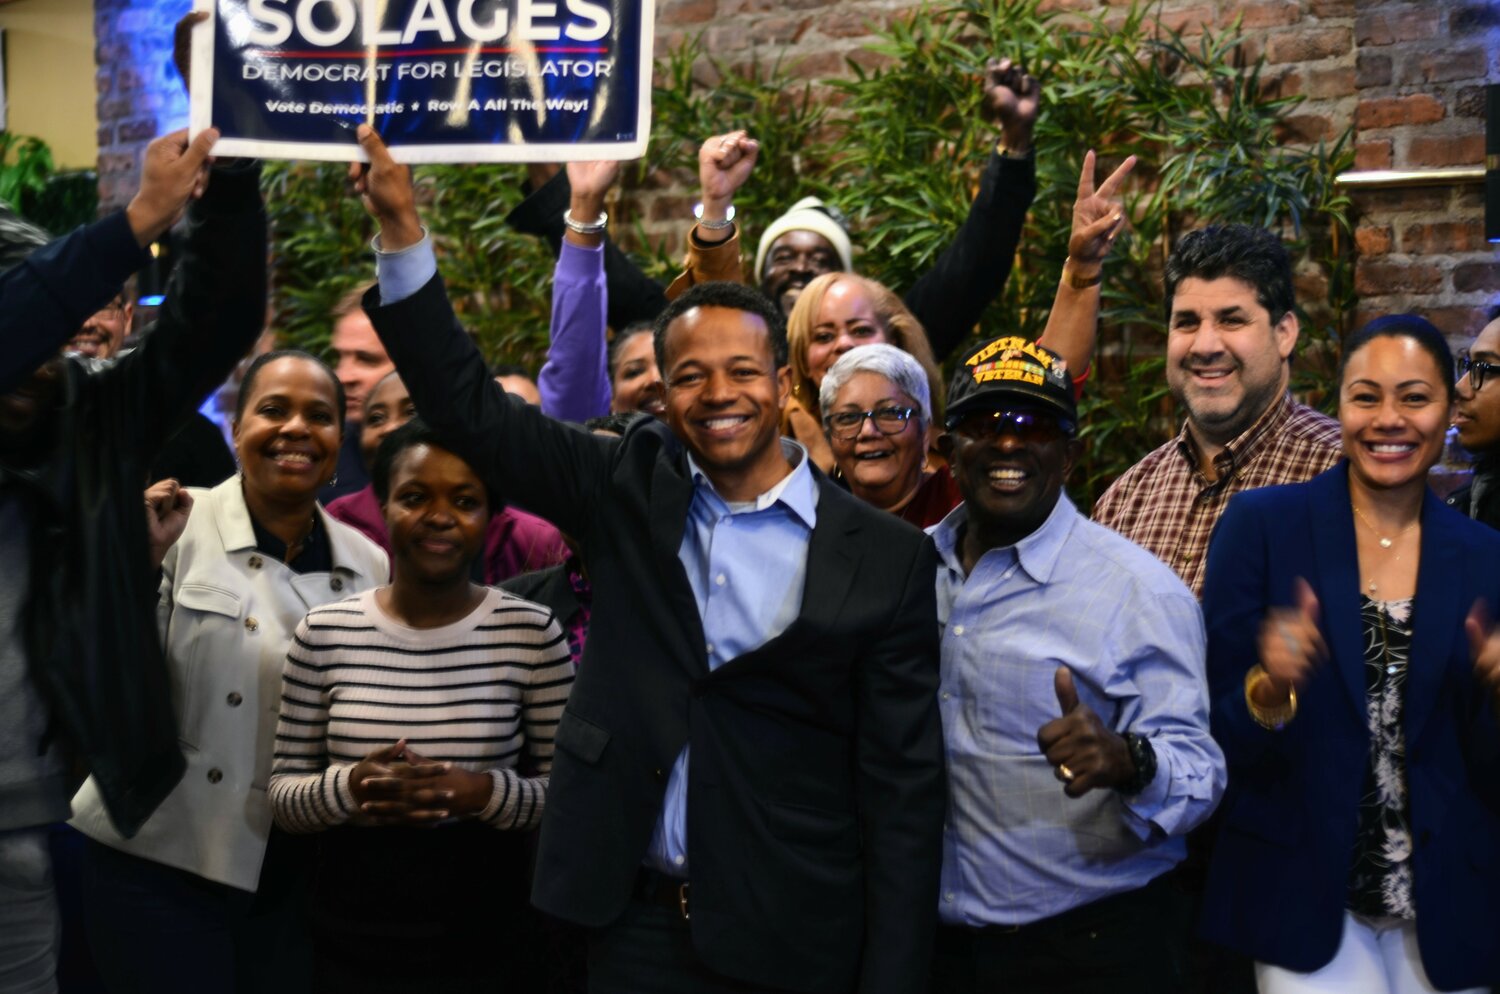 Carrié Solages won a comfortable victory over first-time challenger Sheharyar Ali in the Nassau County Legislature race, joining sweeping wins for incumbents in Valley Stream, according to Tuesday’s election results.